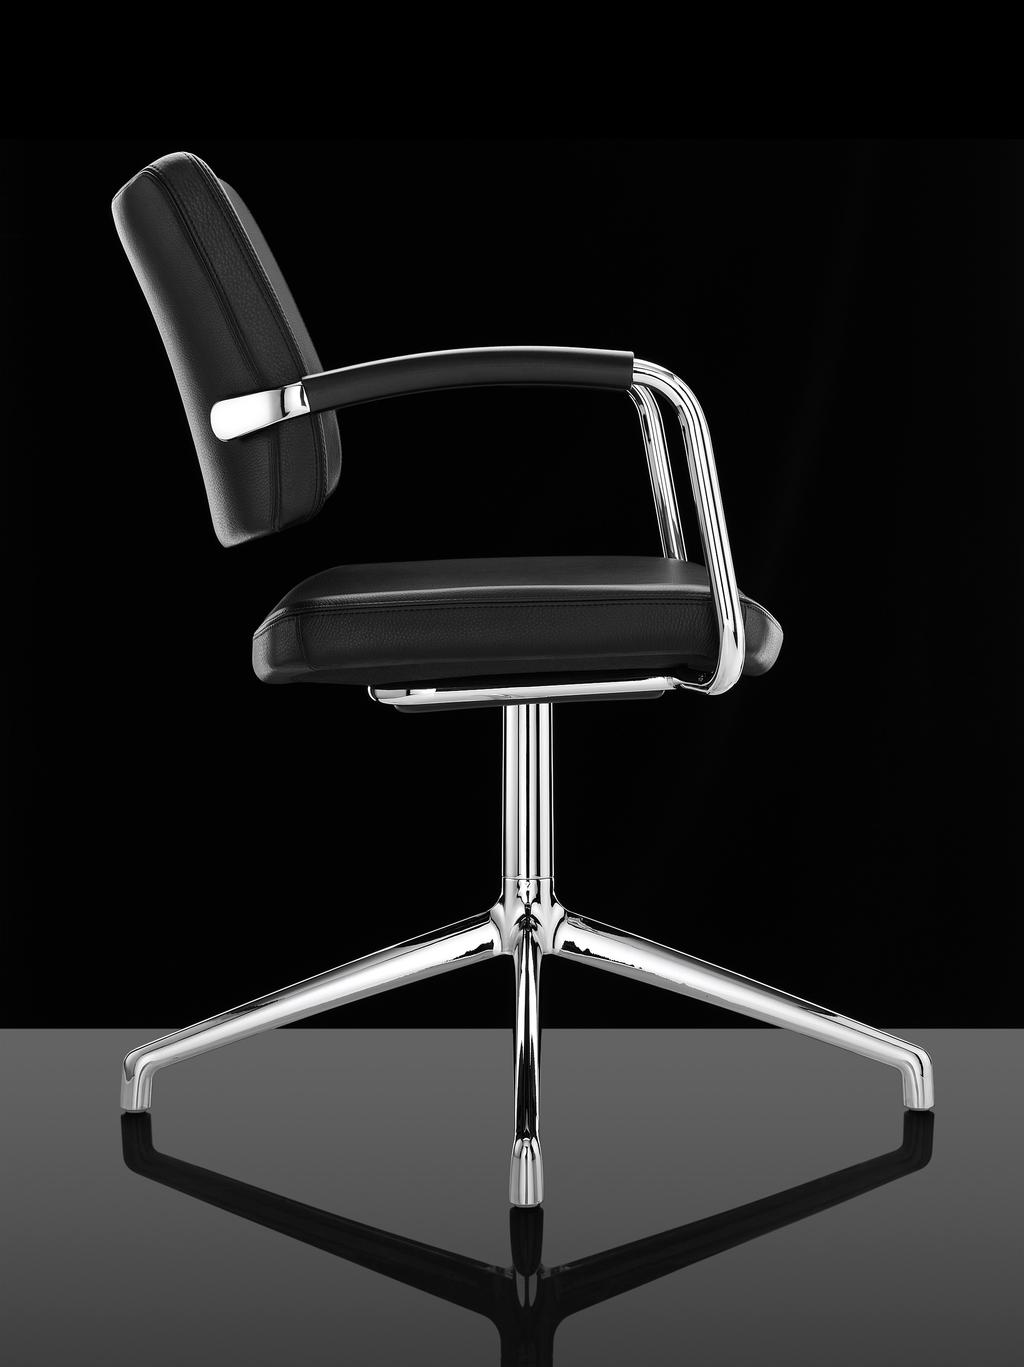 The Pro chair is the ideal accompanying visitor chair and is equally suited to boardroom, meeting Eg.